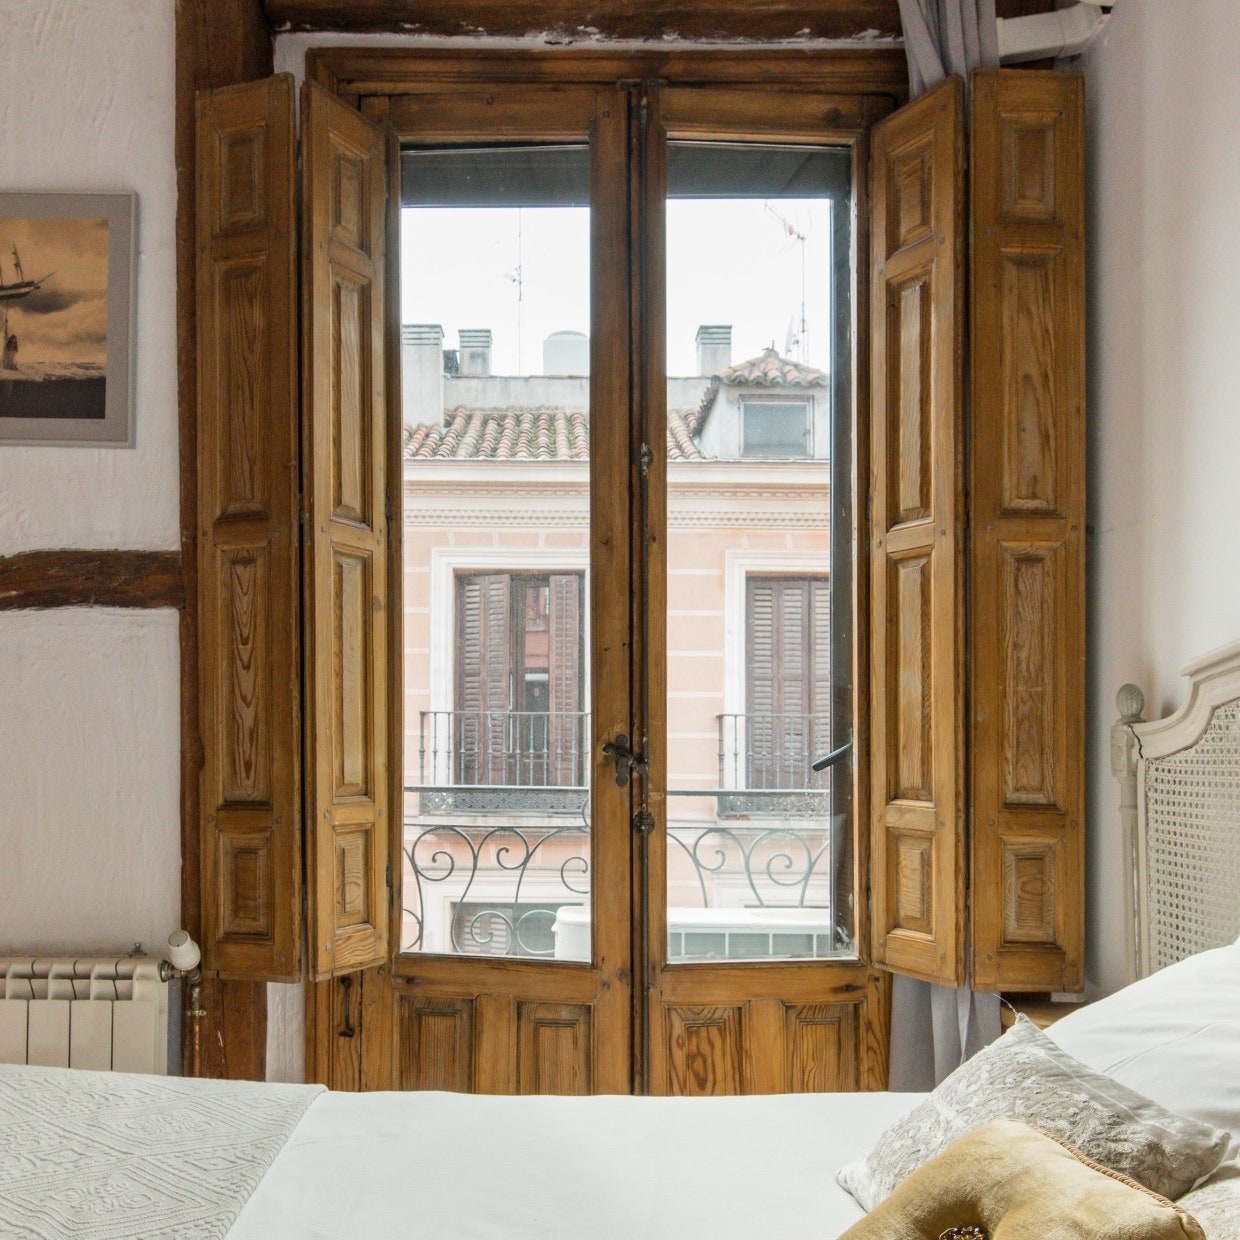 My Favorite Airbnb in Madrid: A Lofted Apartment with Seven Balconies